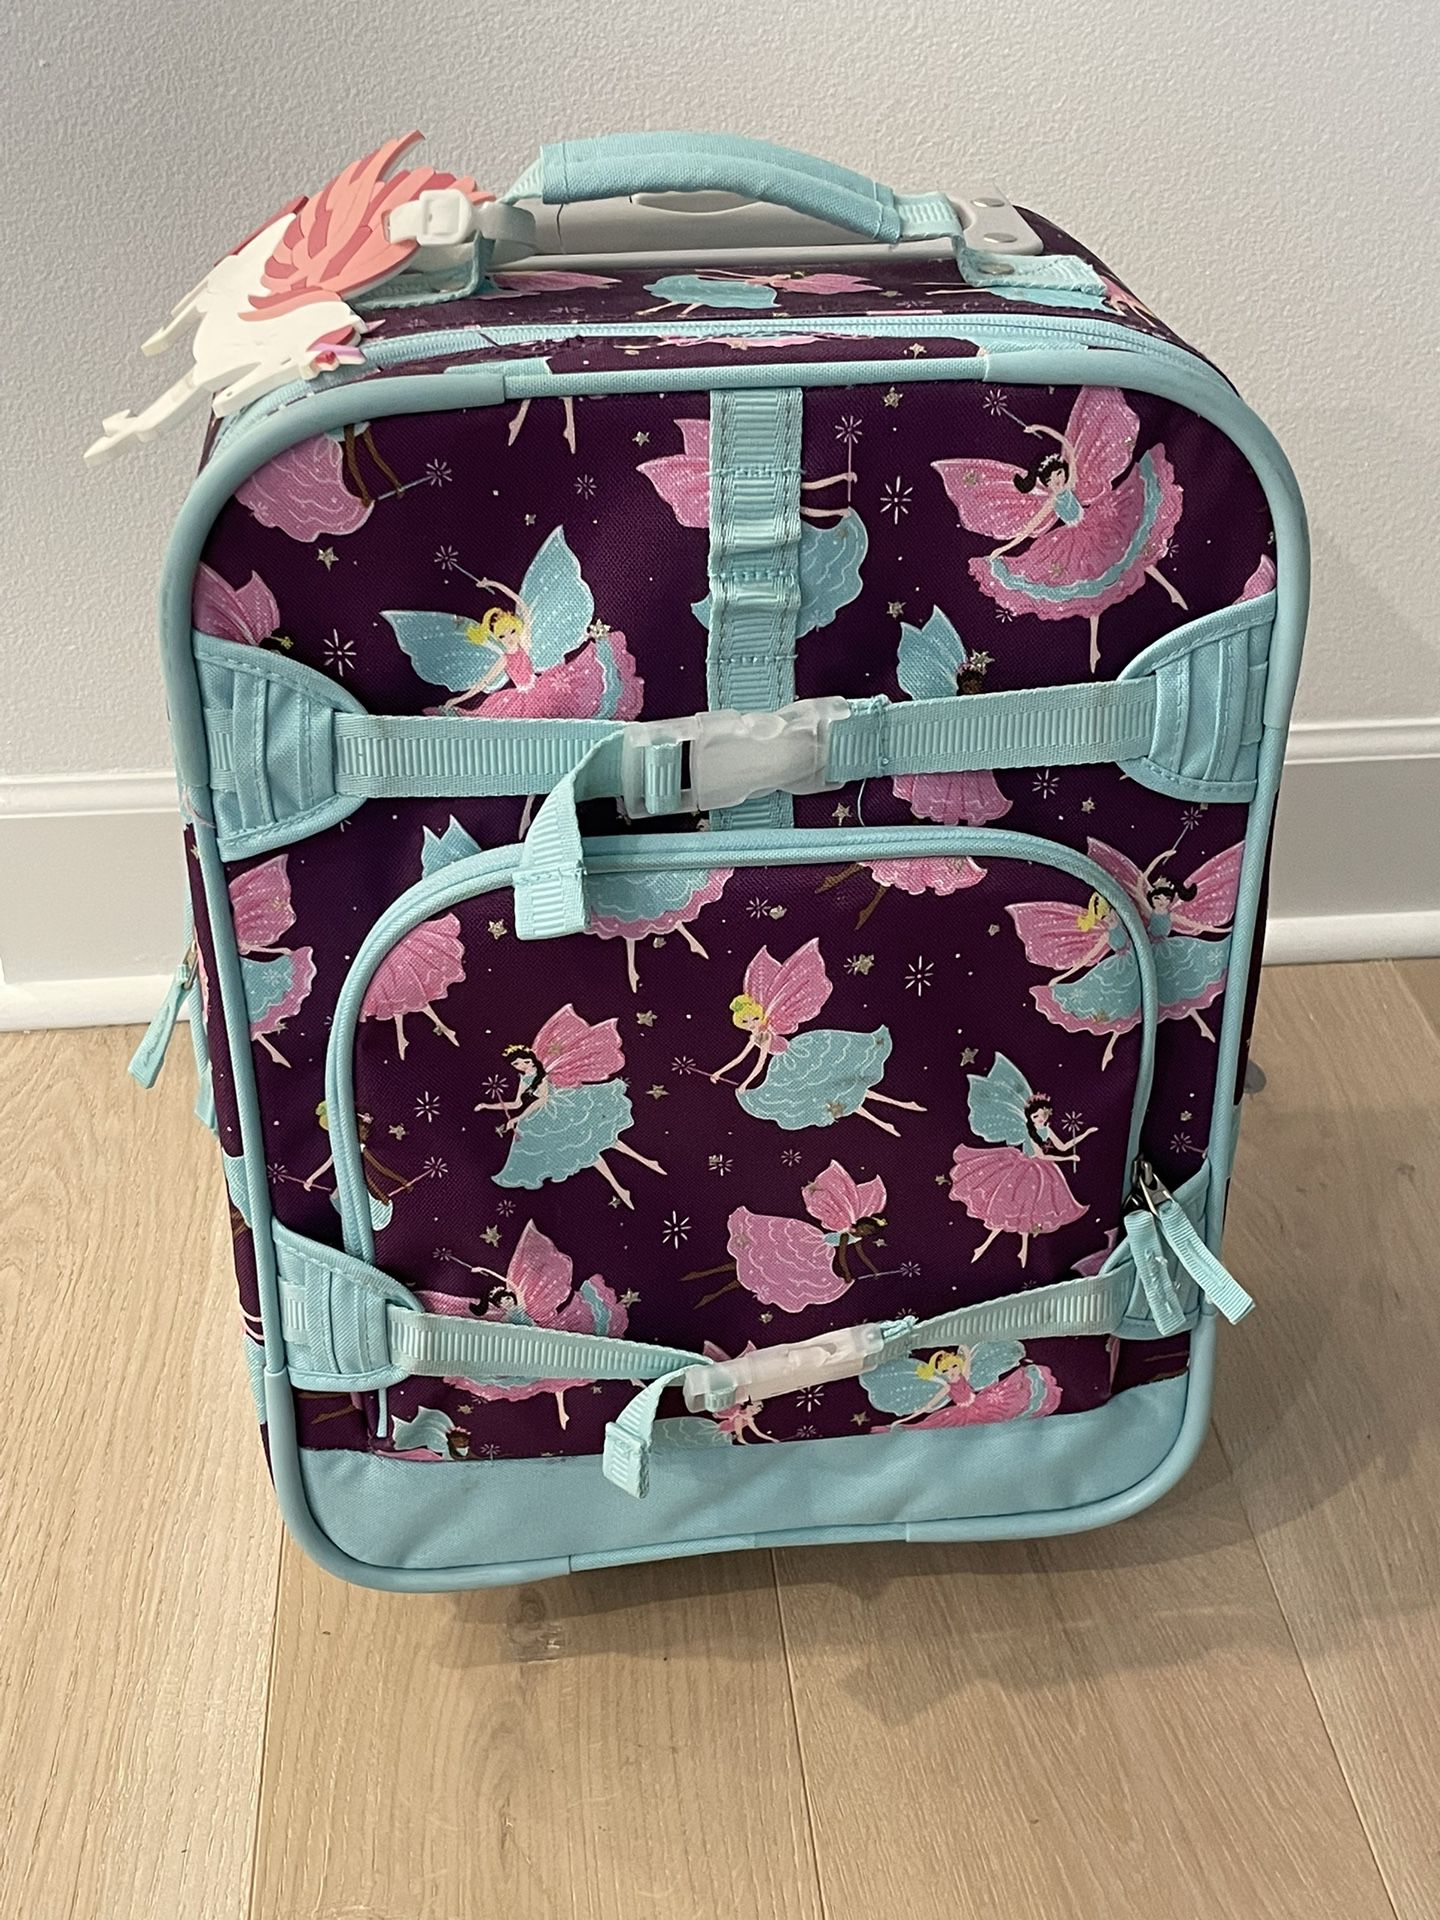 Pottery Barn Kids Carry On Suitcase